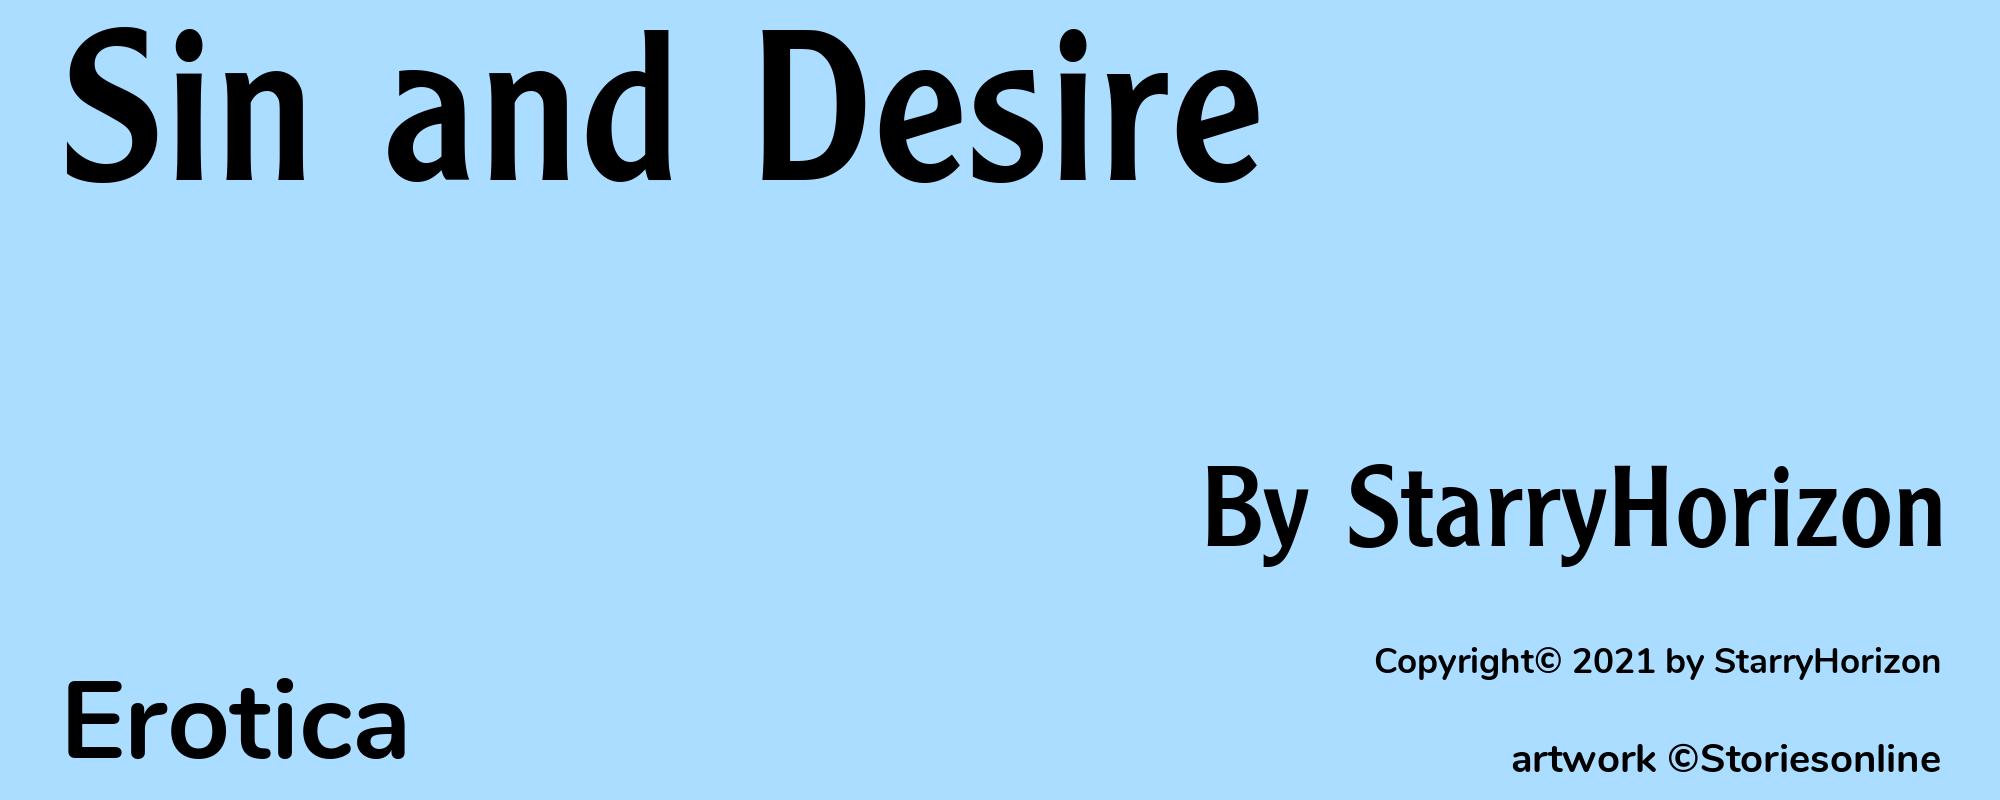 Sin and Desire - Cover